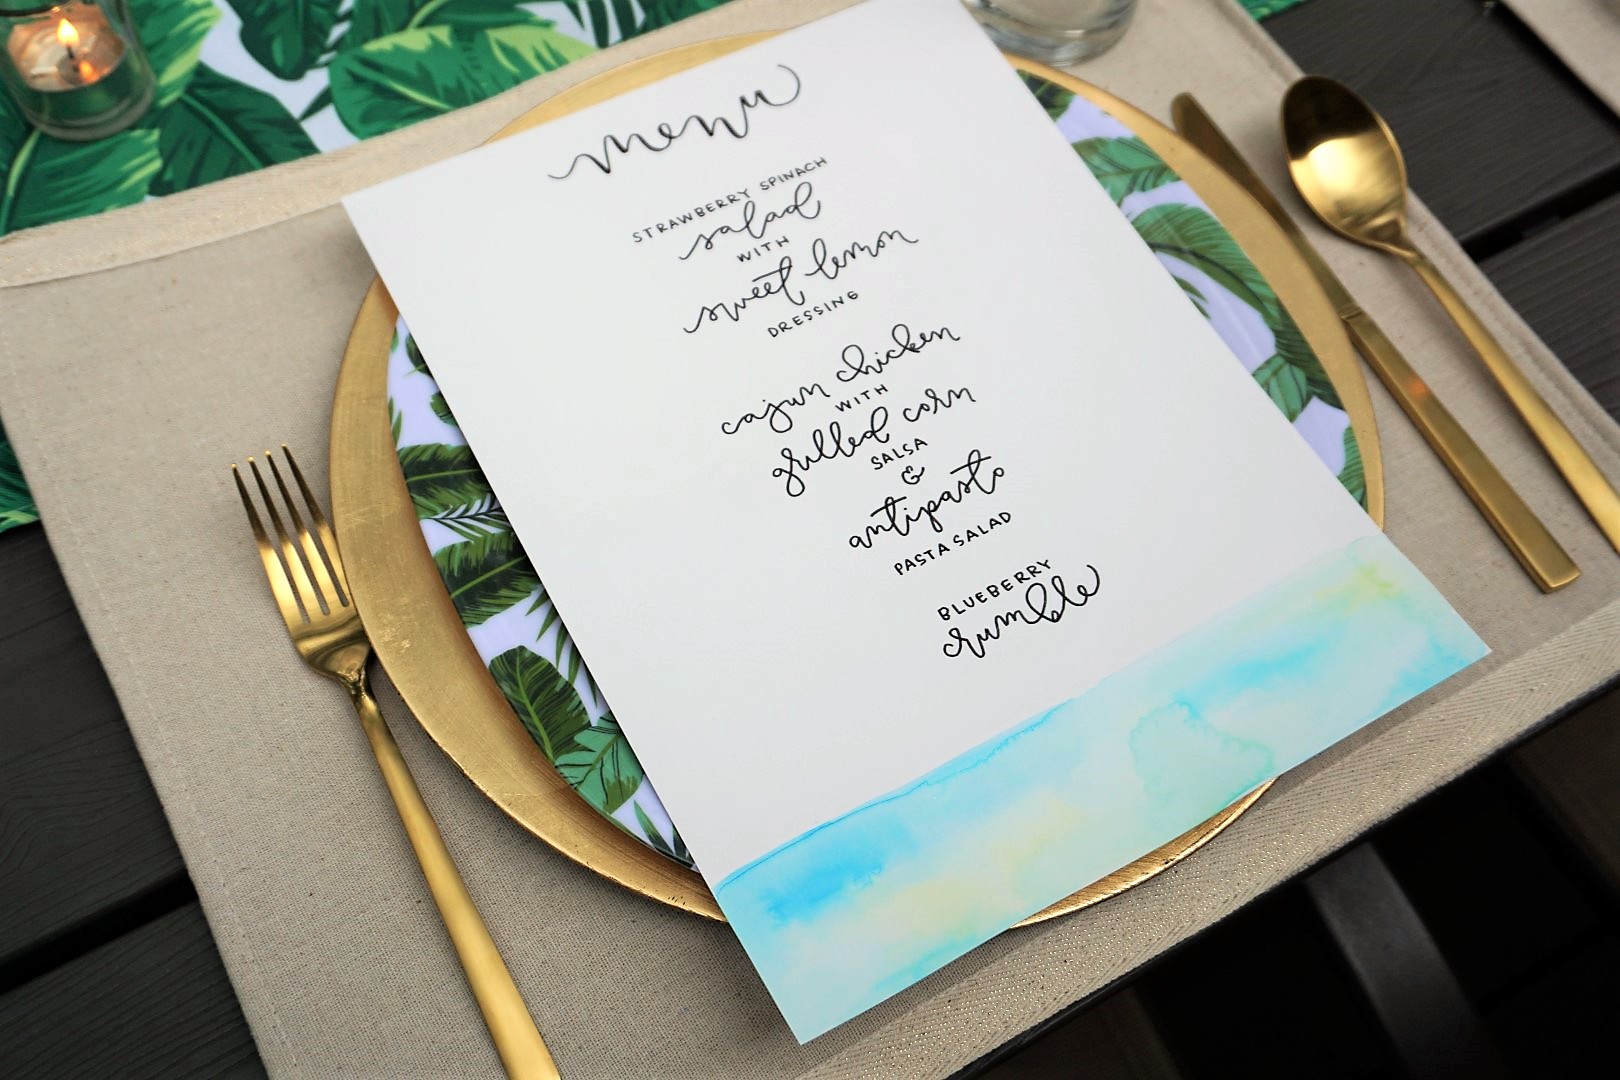  Summer dinner menu with watercolor and calligraphy. 